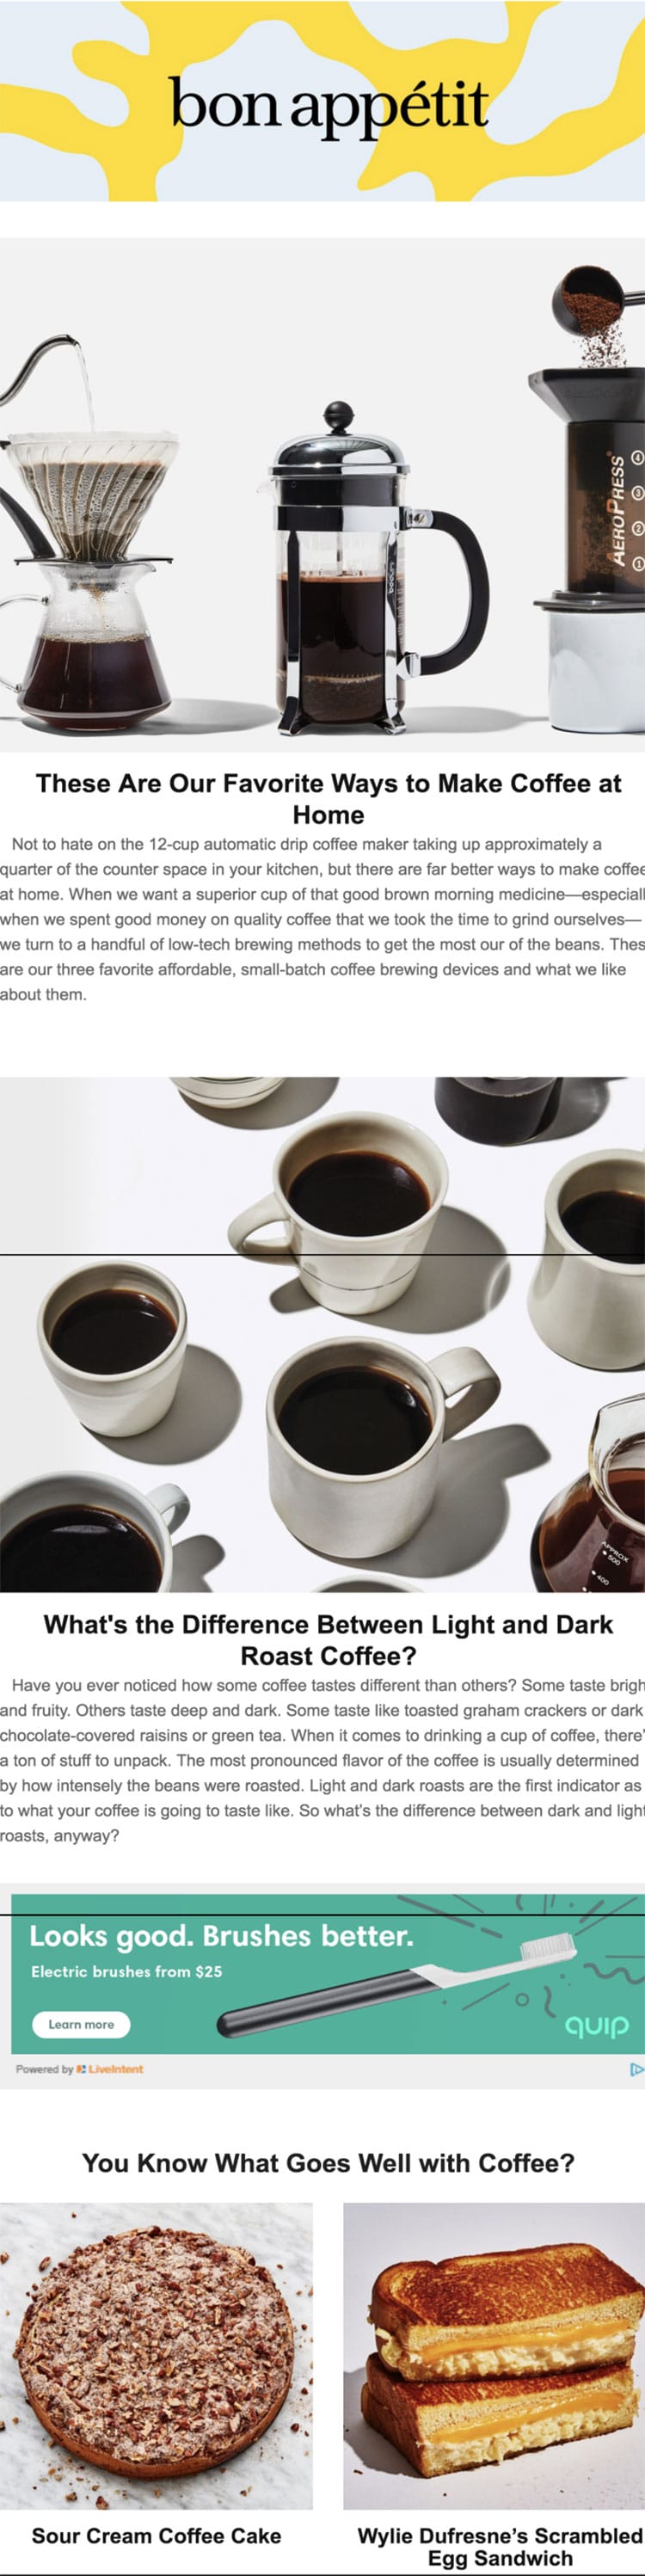 The bon appetit newsletter features coffee imagery and stories for food lovers. 